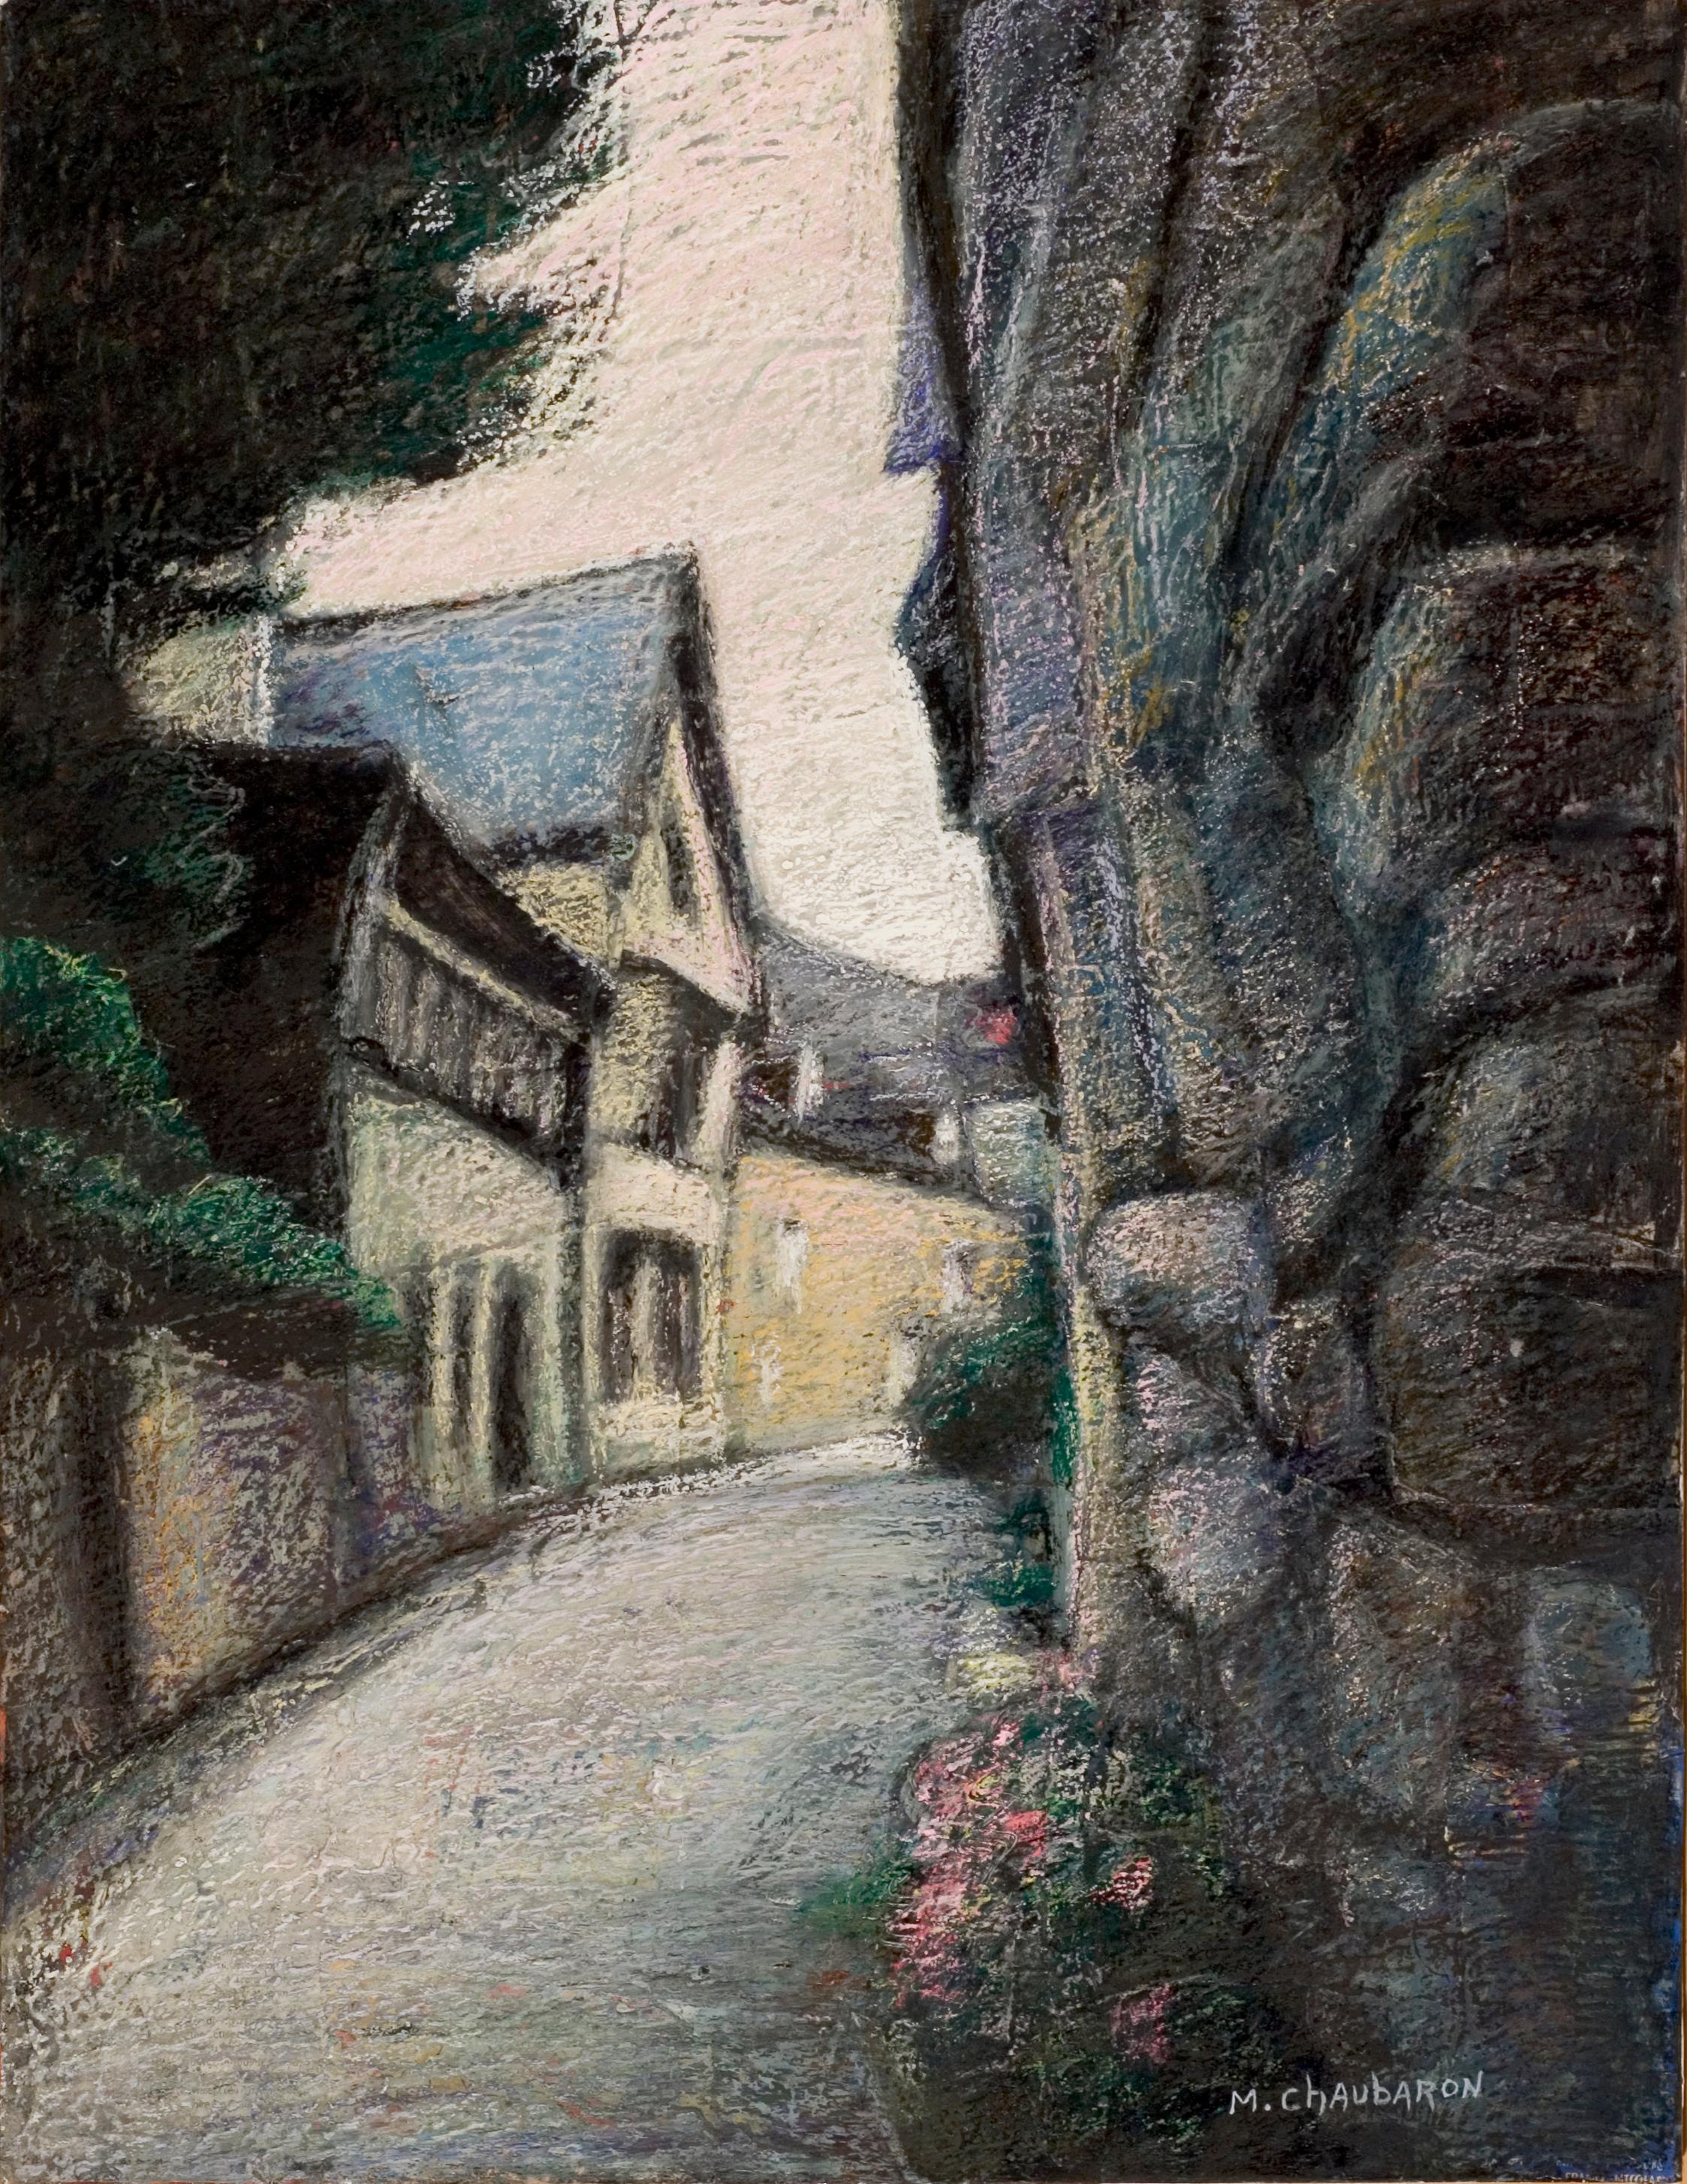 Marc Chaubaron Landscape Painting - Brittany Uphill Street with Half-Timbering Houses at Sunset Oil Pastel